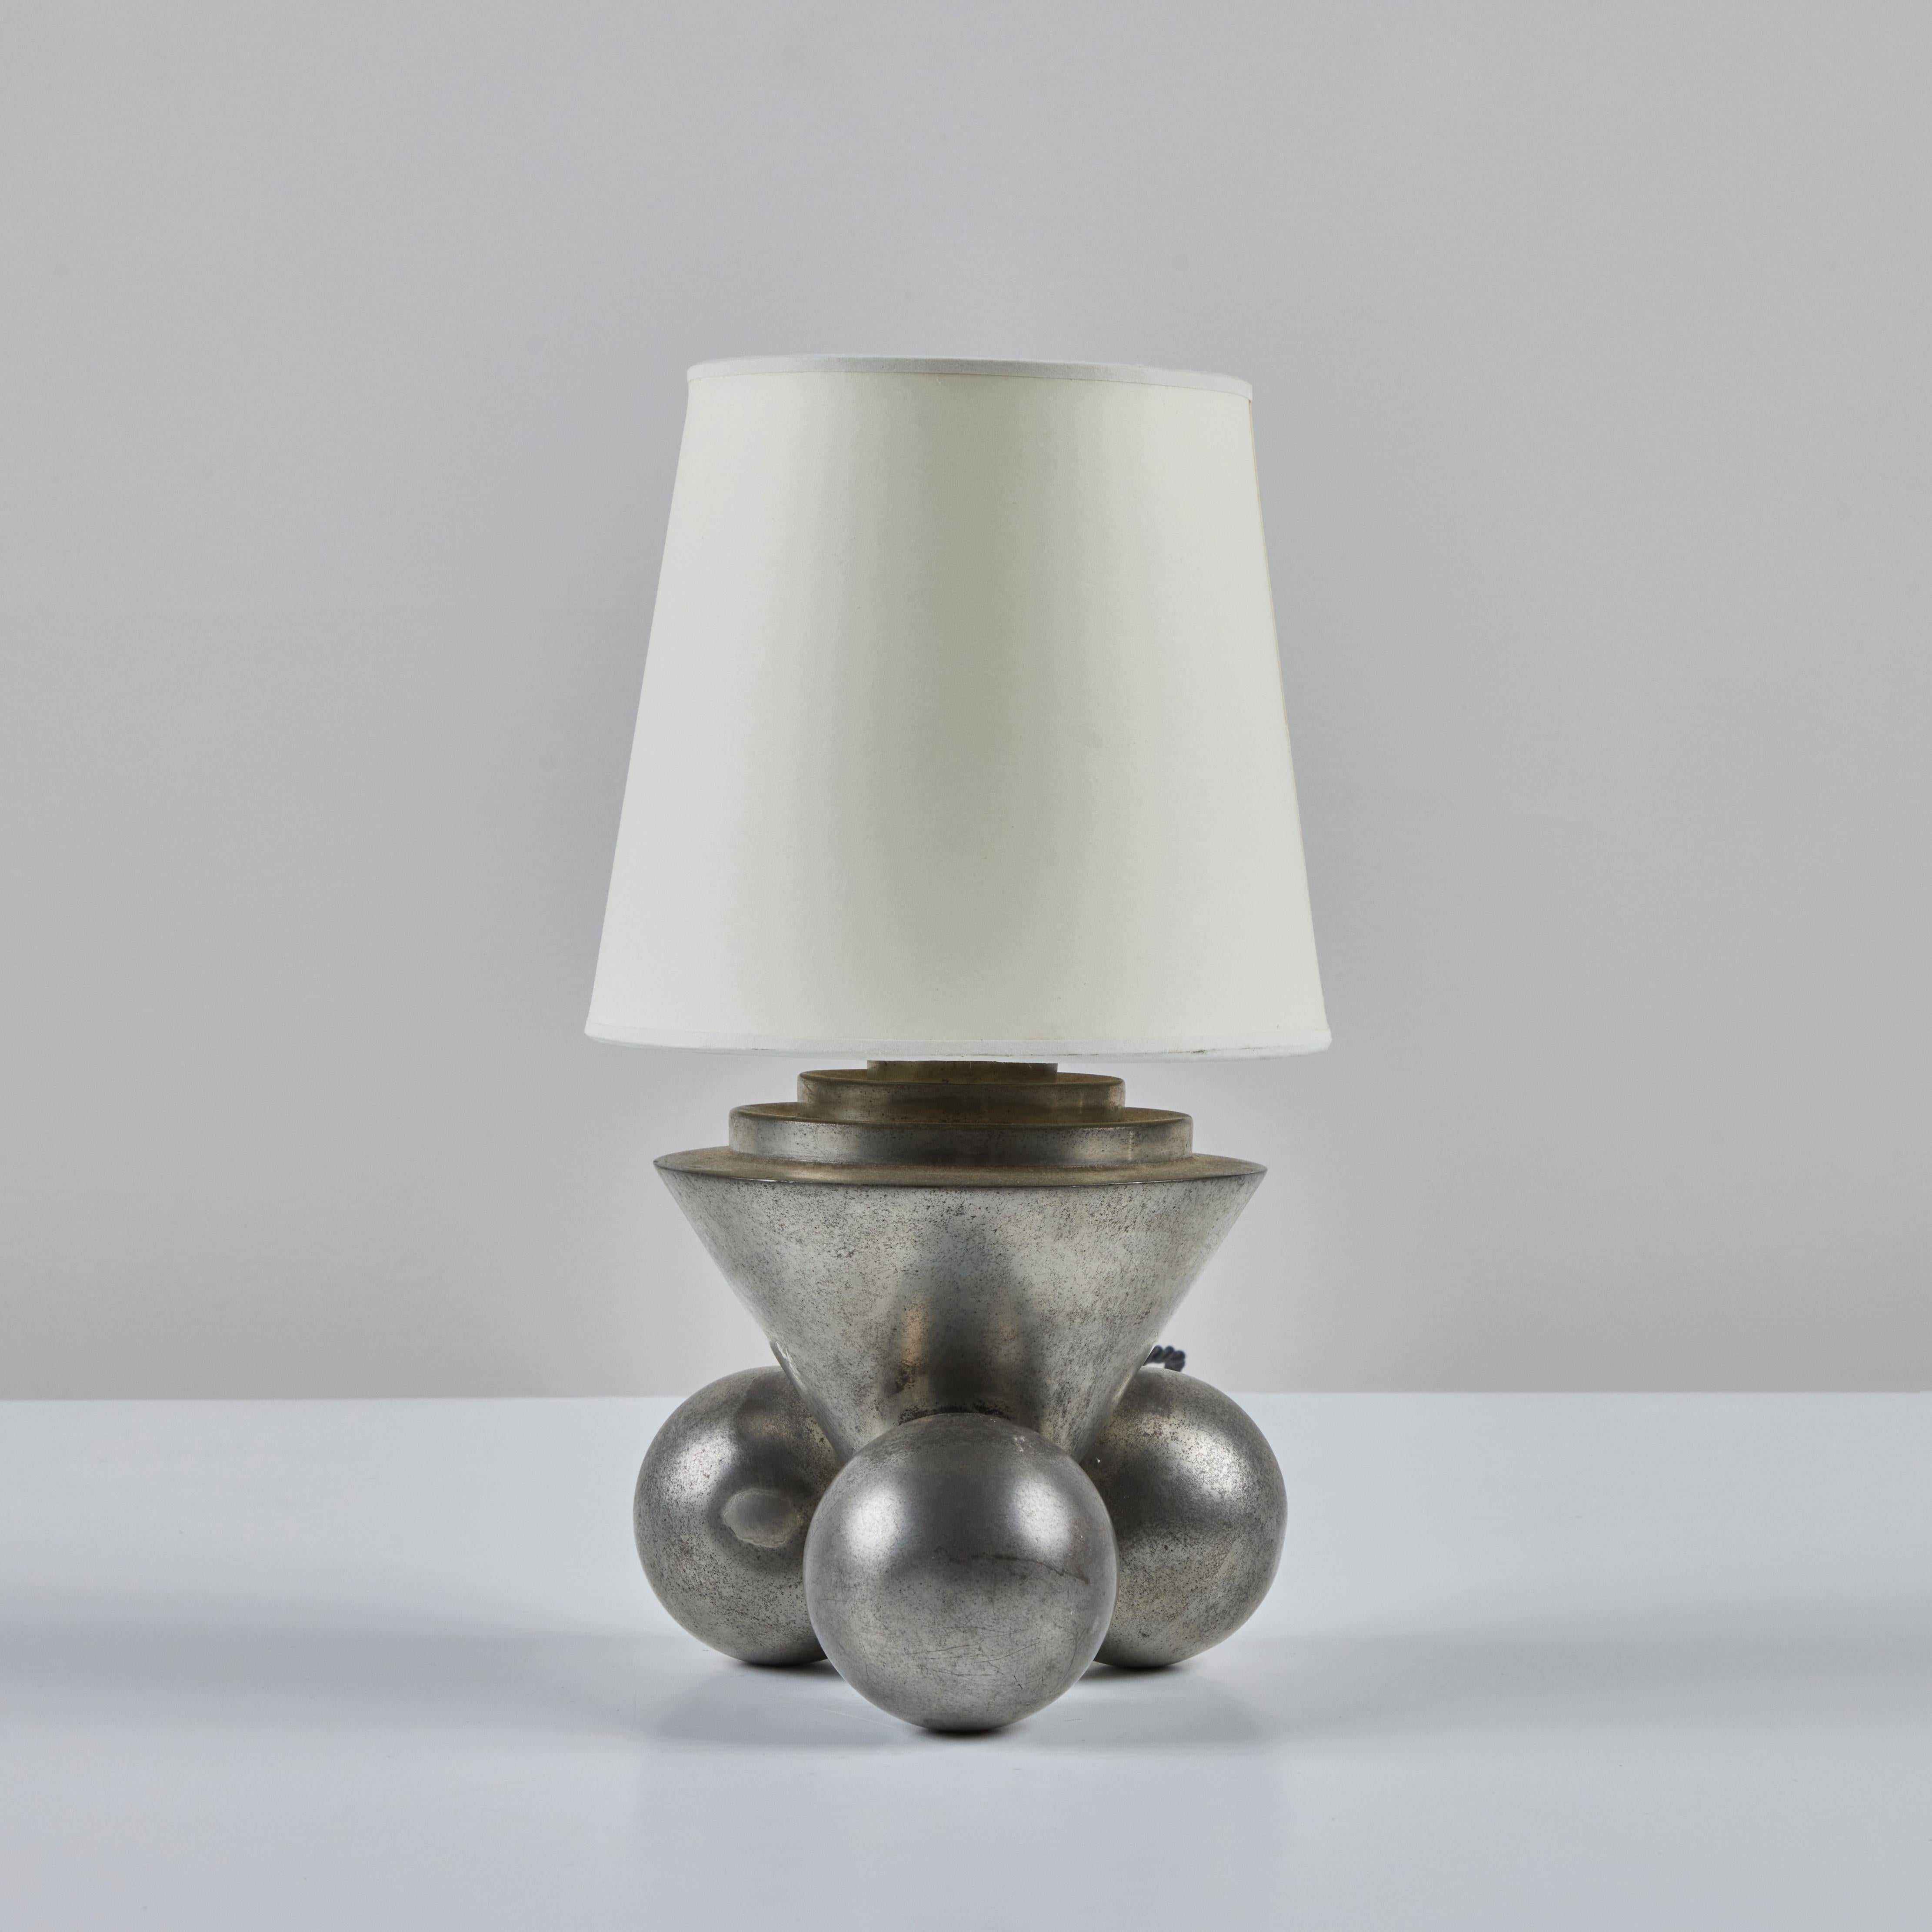 20th Century Art Deco Table Lamp in the Style of Chase USA